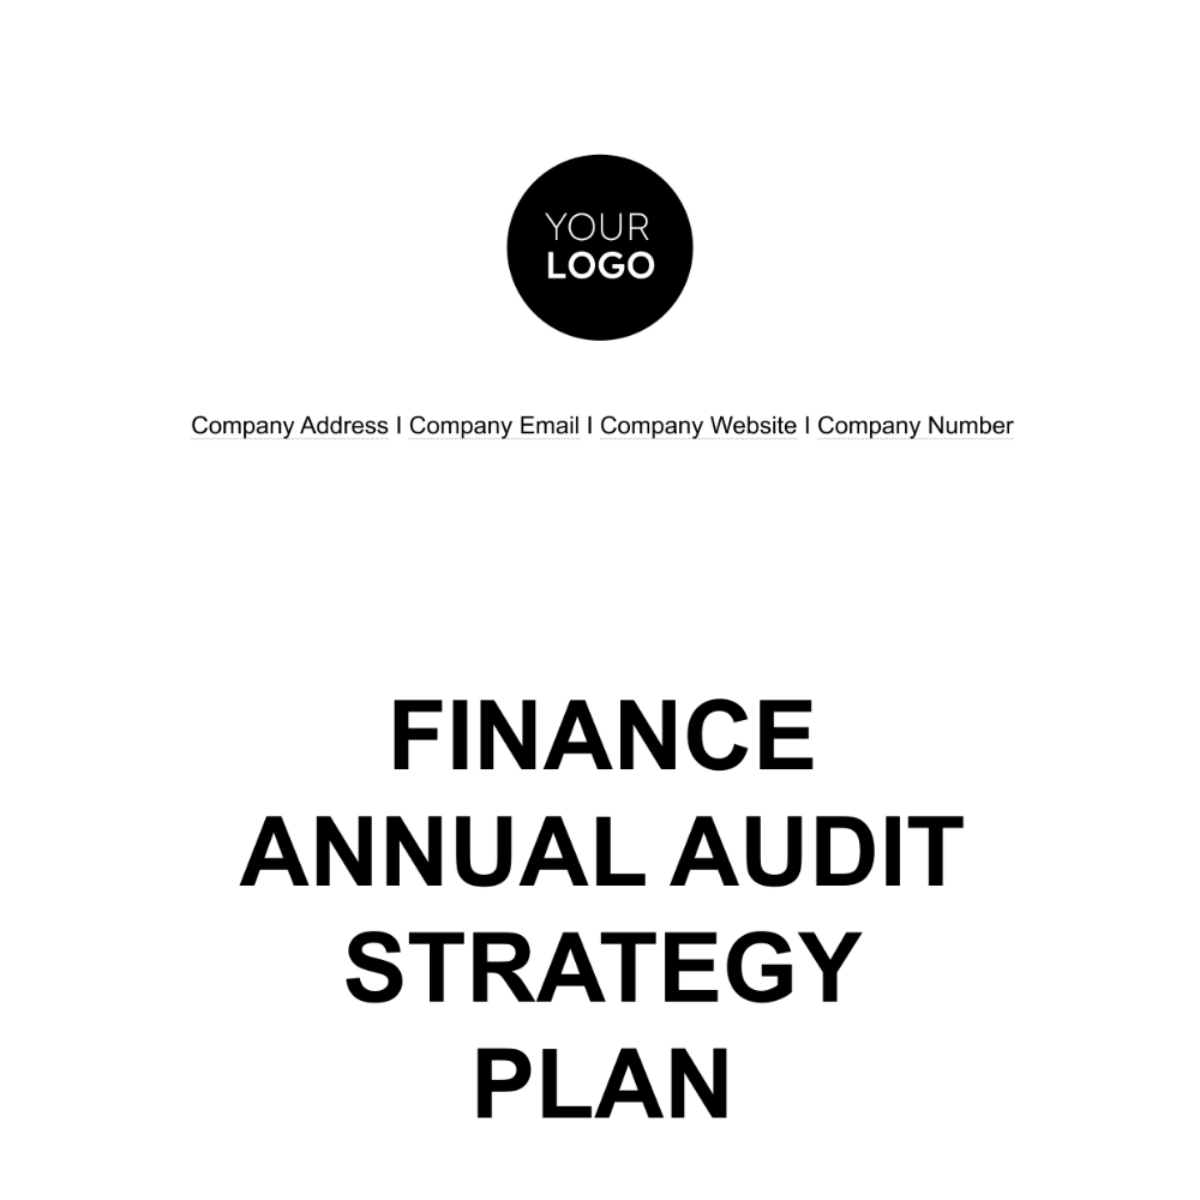 Free Finance Annual Audit Strategy Plan Template